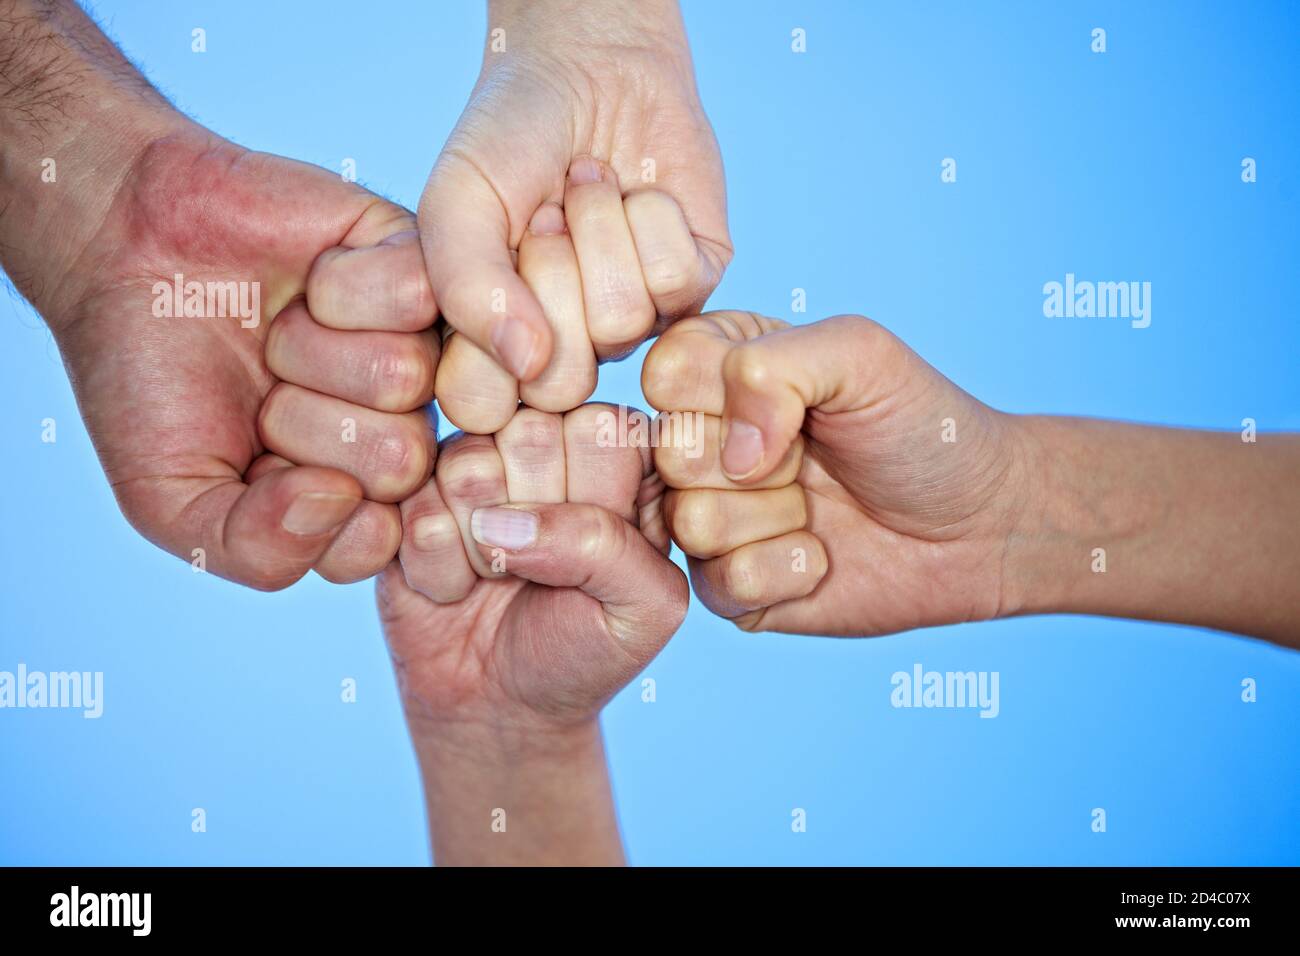 Four clenched fists meet against a blue sky Stock Photo